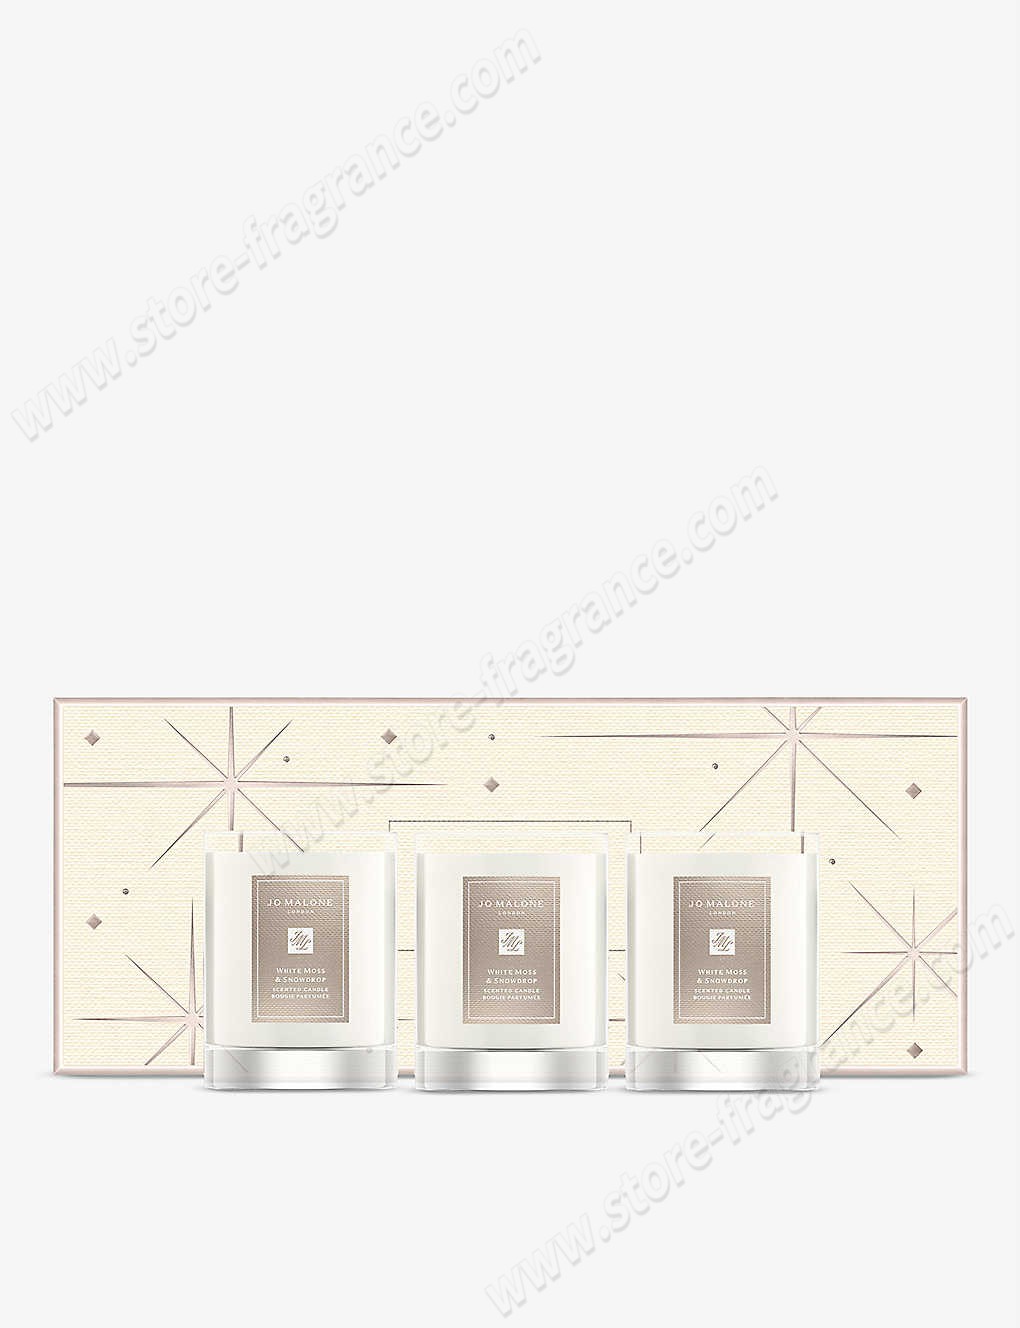 JO MALONE LONDON/White Moss and Snowdrop scented travel candles set of three ✿ Discount Store - JO MALONE LONDON/White Moss and Snowdrop scented travel candles set of three ✿ Discount Store